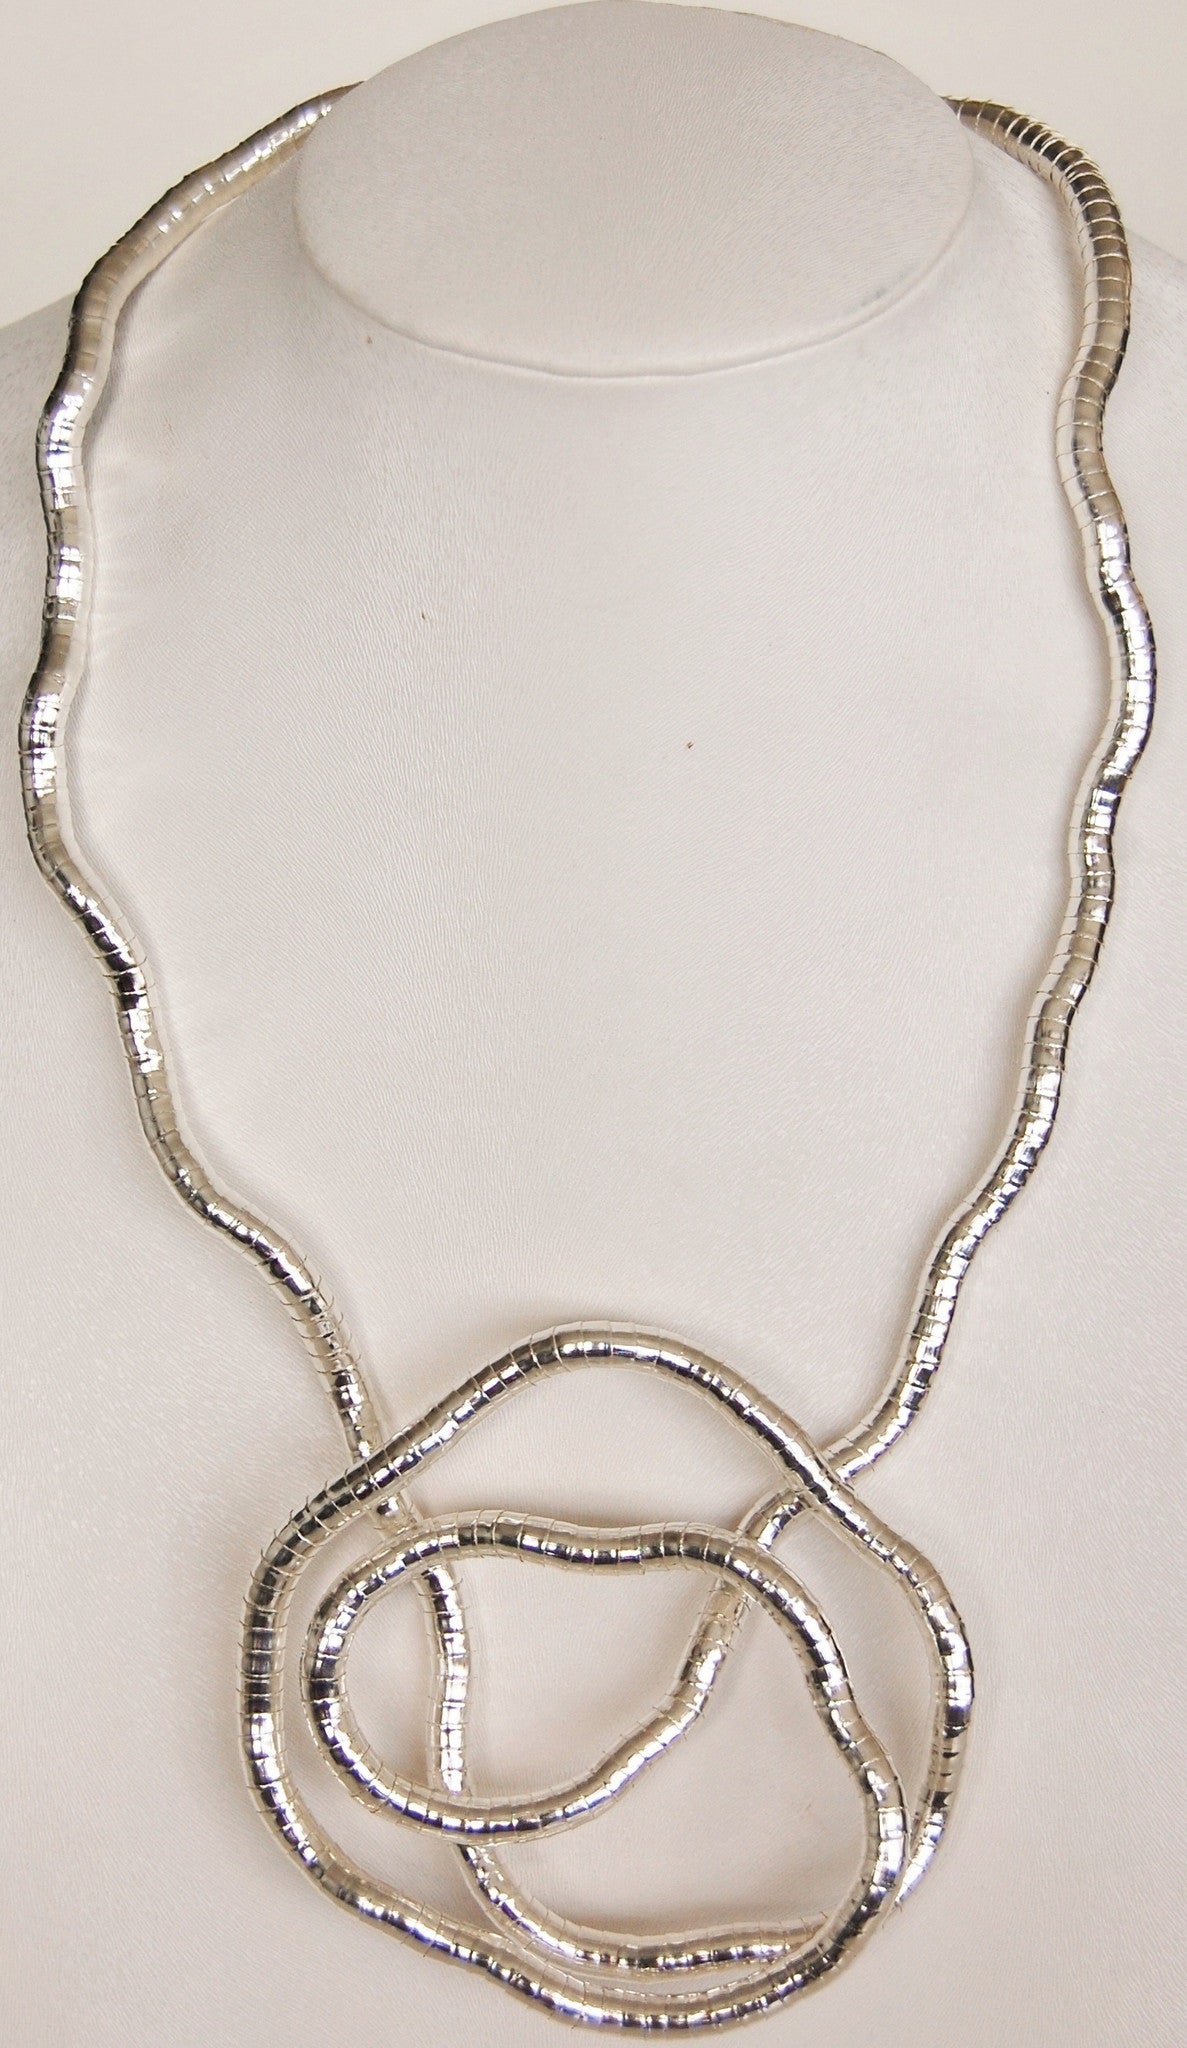 Silver Snake Twist, 5mm Thick, 48" Circumference